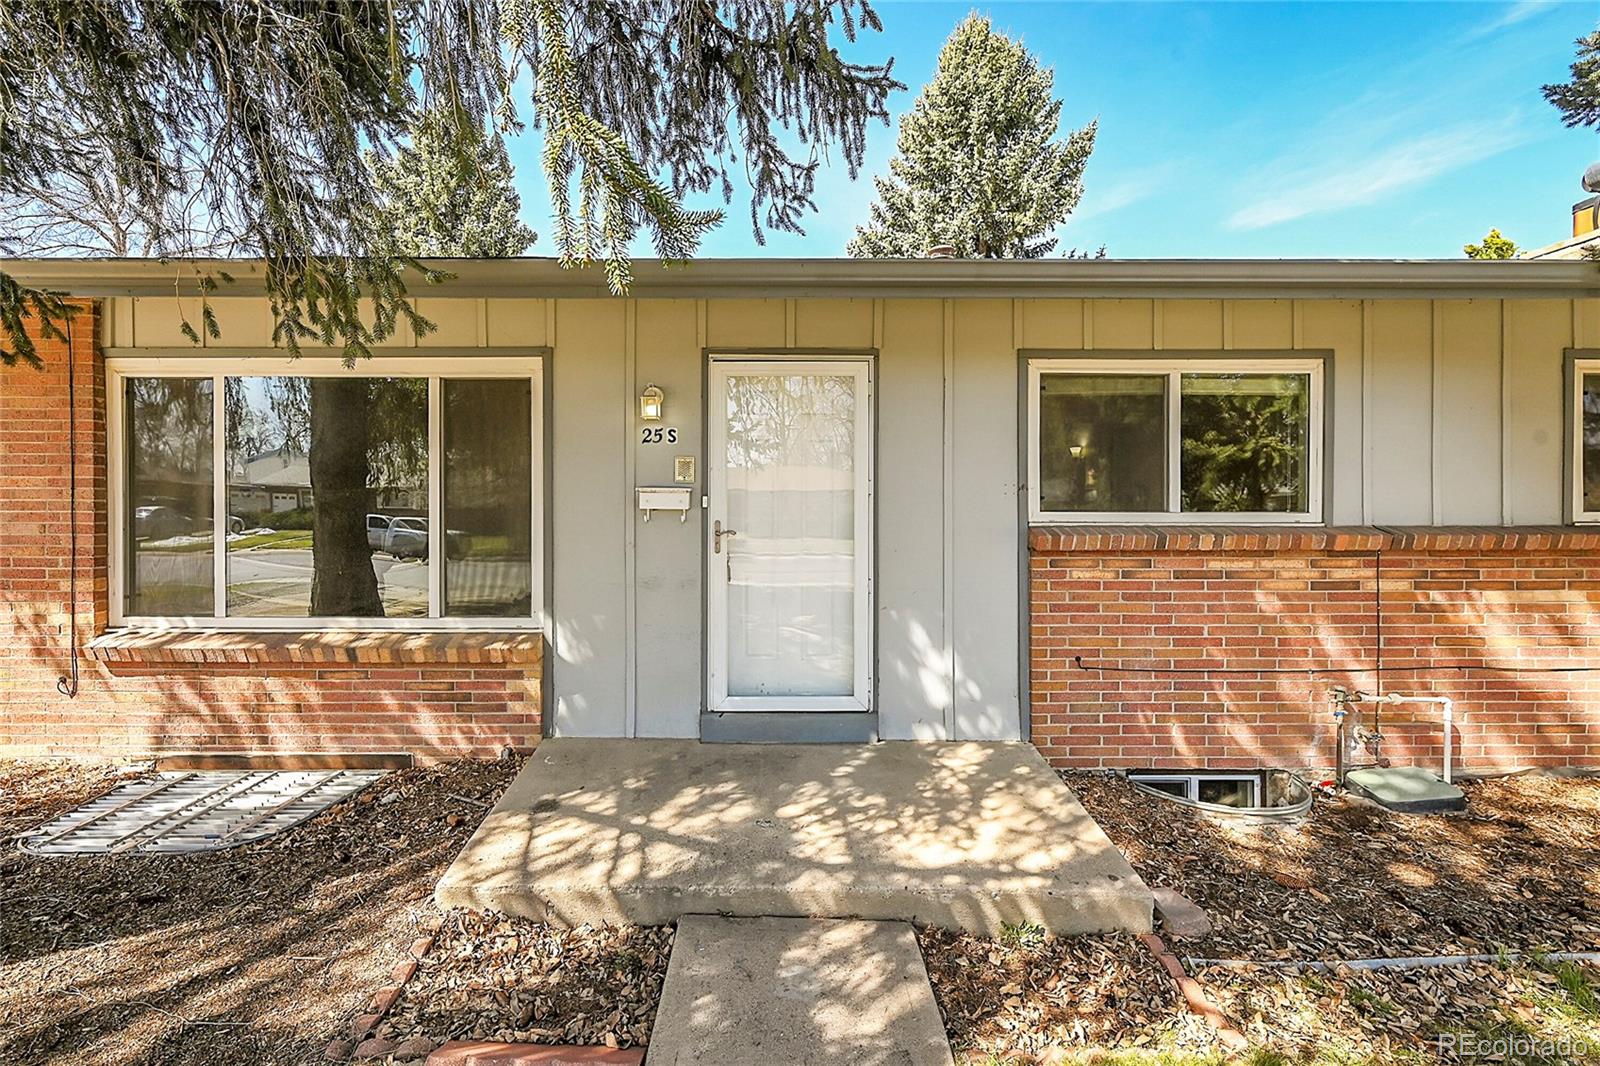 Report Image for 25 S Dudley Street,Lakewood, Colorado